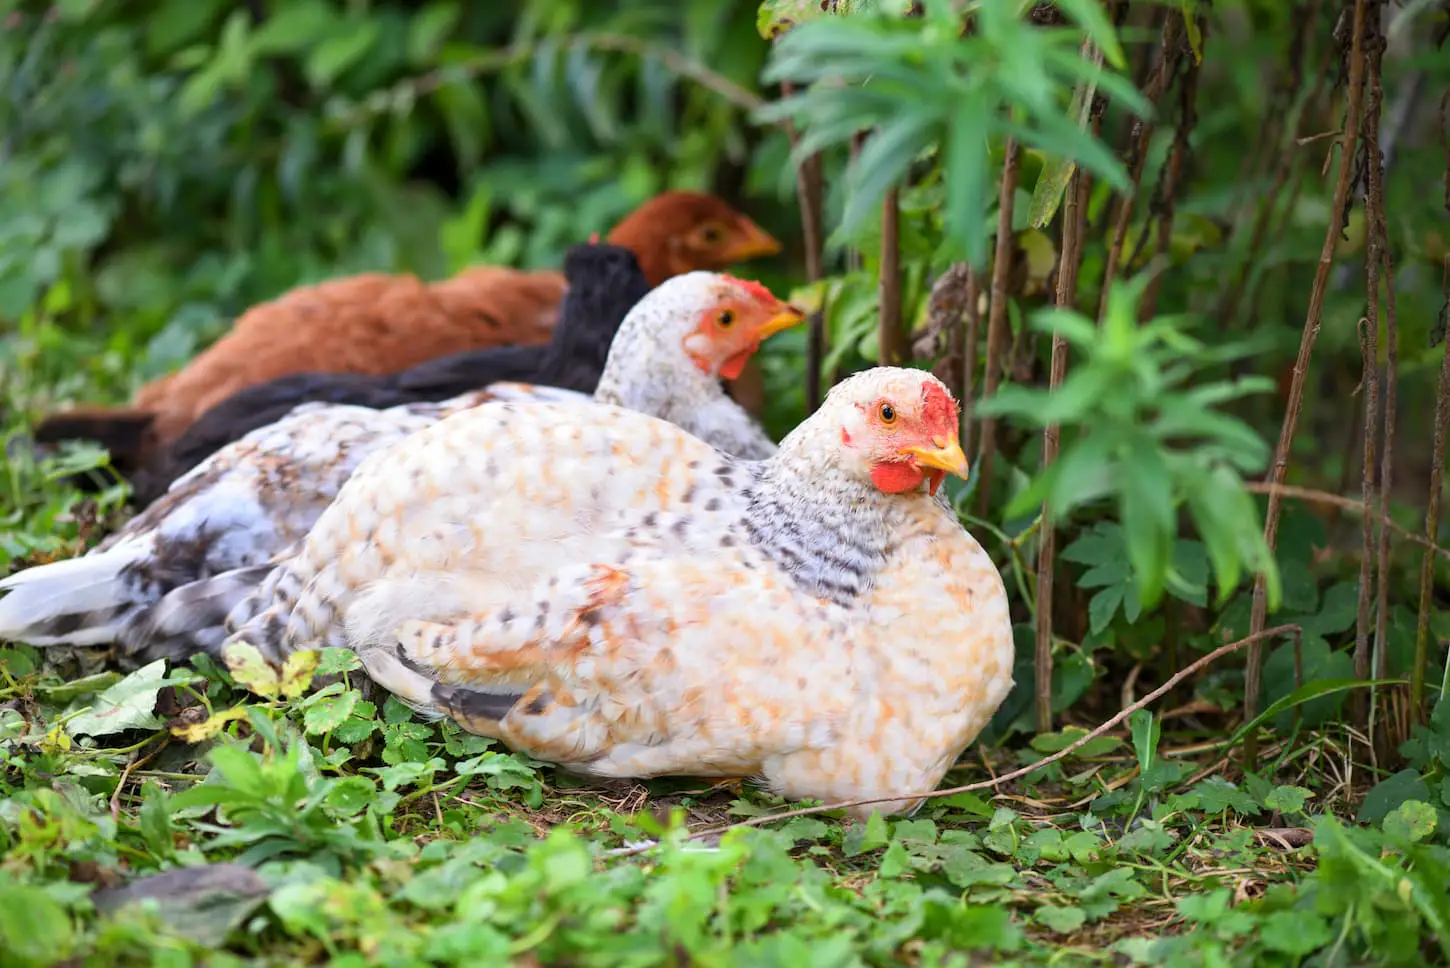 An image of Hens sitting on the green grass.